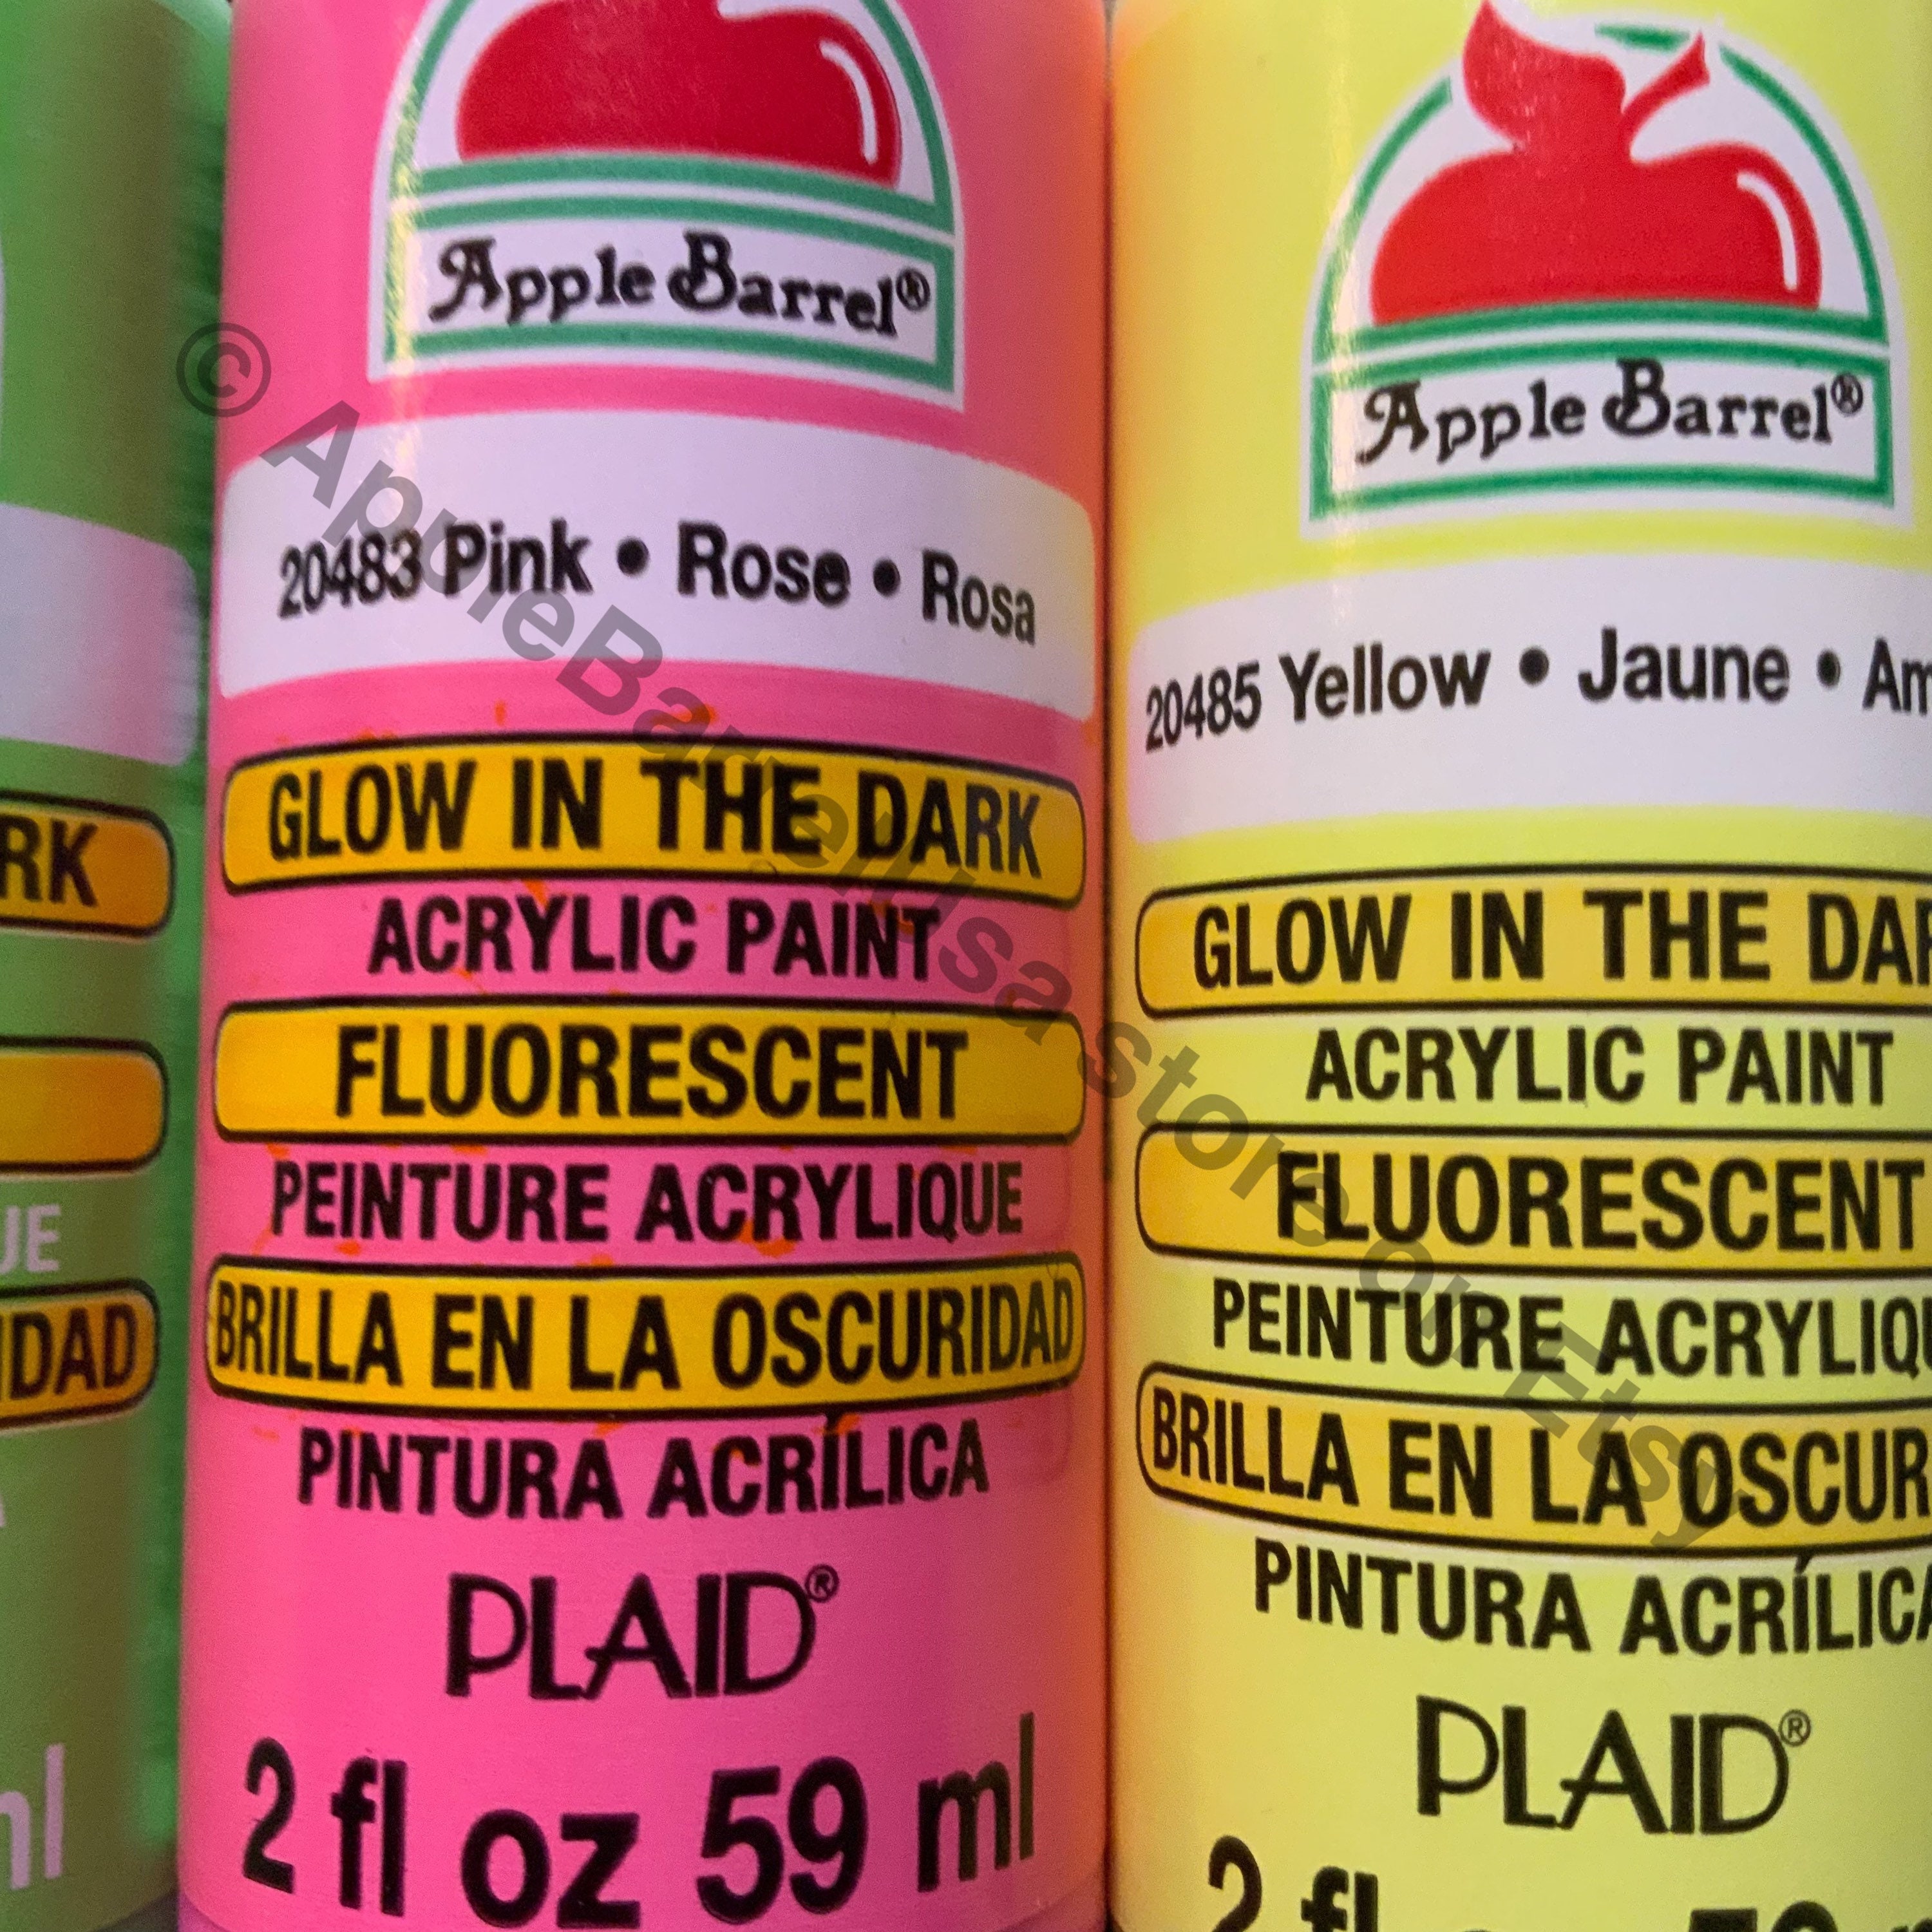 Apple Barrel ® Glow-in-the-dark 2 Oz Acrylic Paint. Buy More & Save on  Shipping 